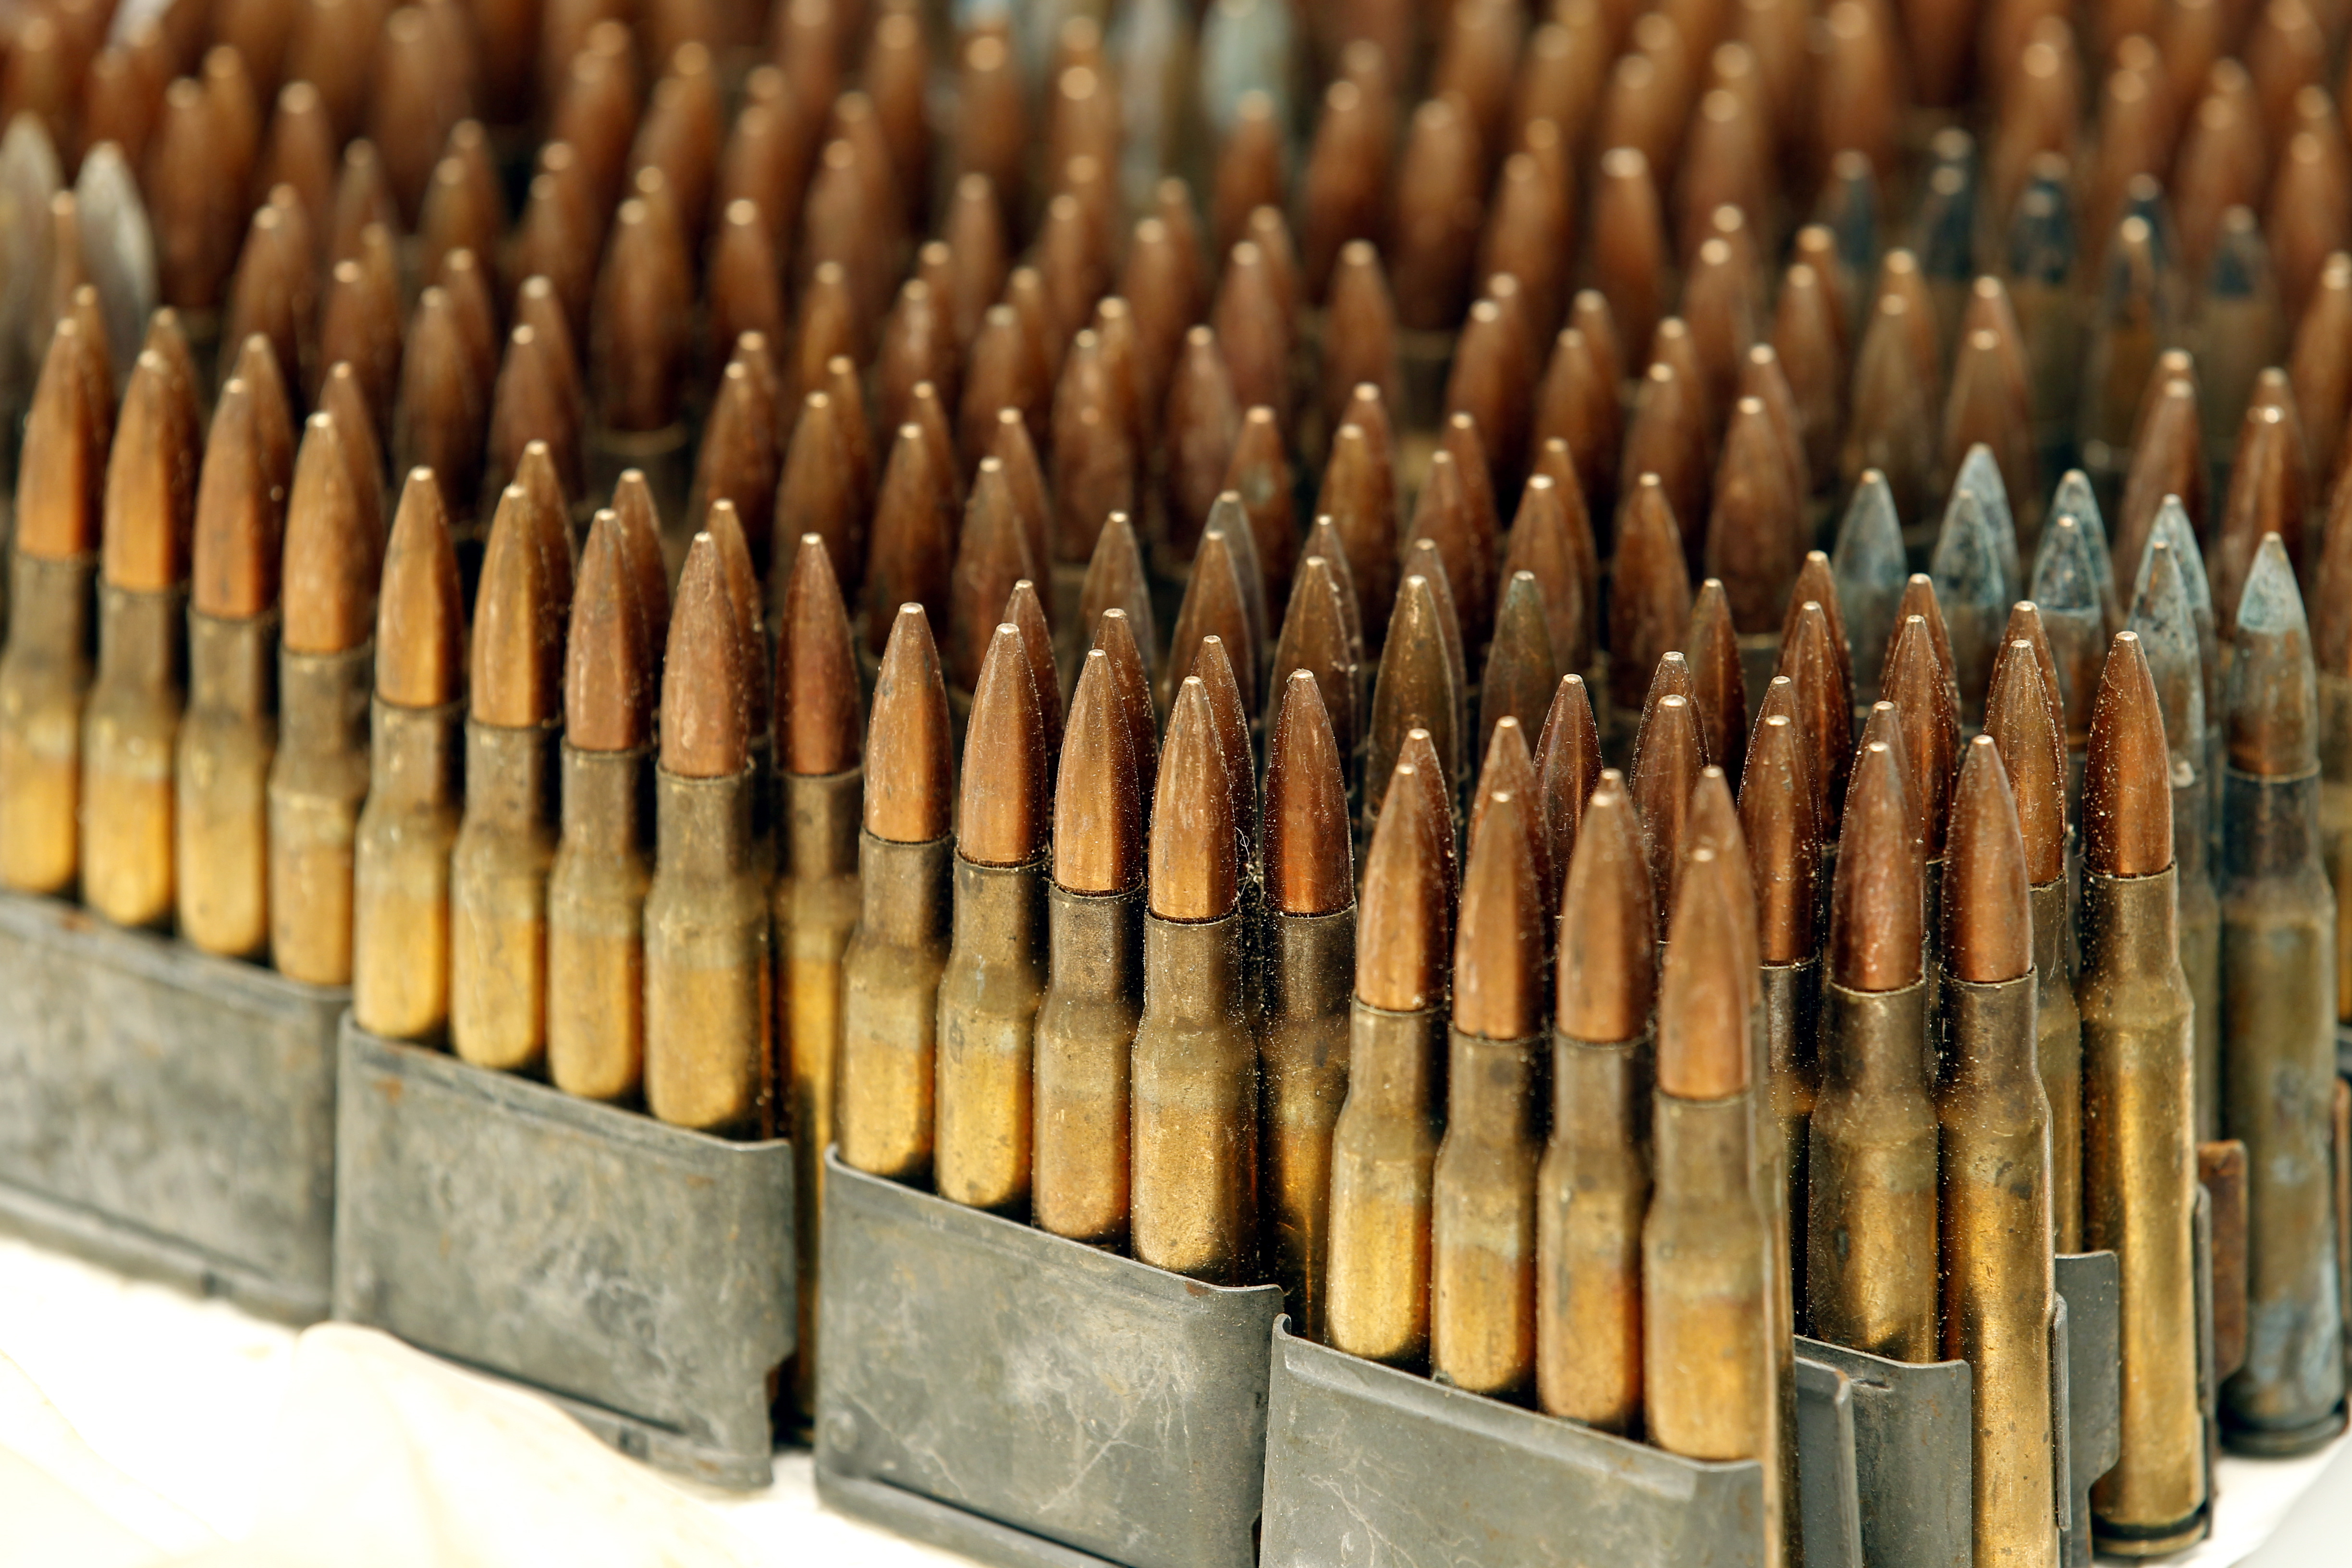 New York - Ammunition Flying Off Store Shelves With New NY Laws